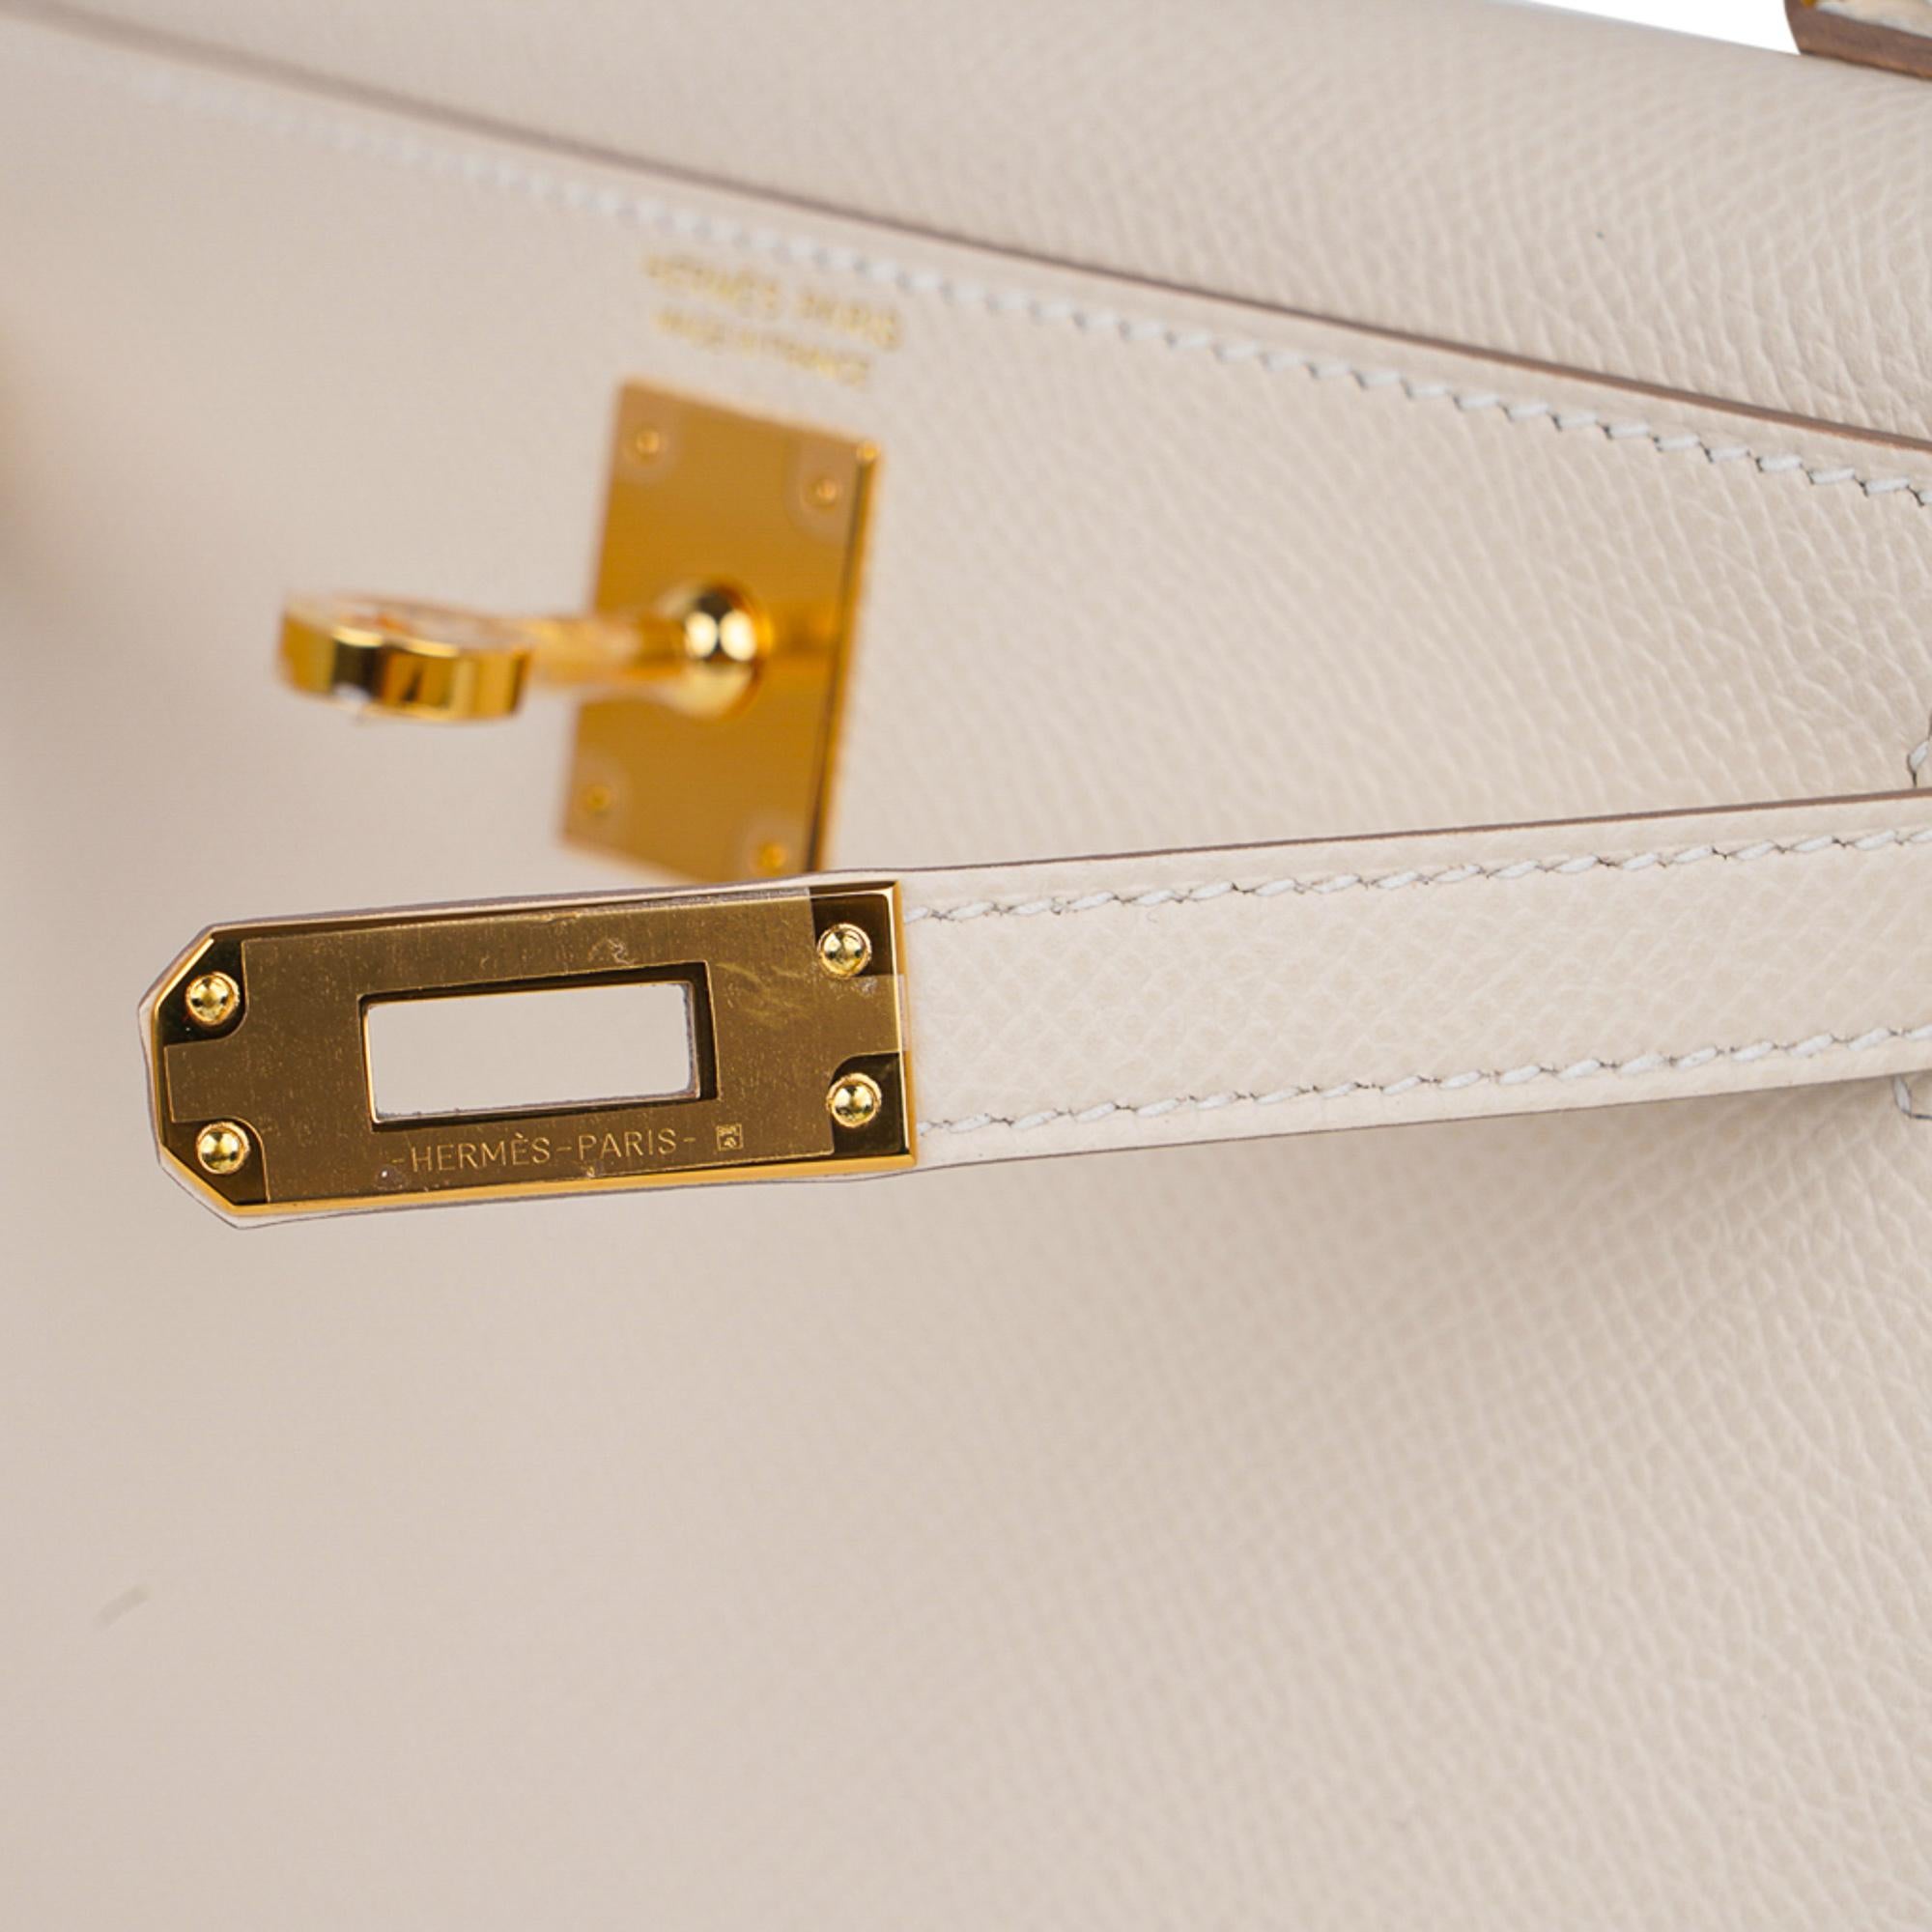 Mightychic offeres a guaranteed authentic Hermes Kelly 20 Sellier Mini bag.
Coveted neutral Craie Epsom leather with gold hardware.
Carry by hand, shoulder or cross body.
Divine size for day to evening. 
Comes with signature Hermes box, shoulder